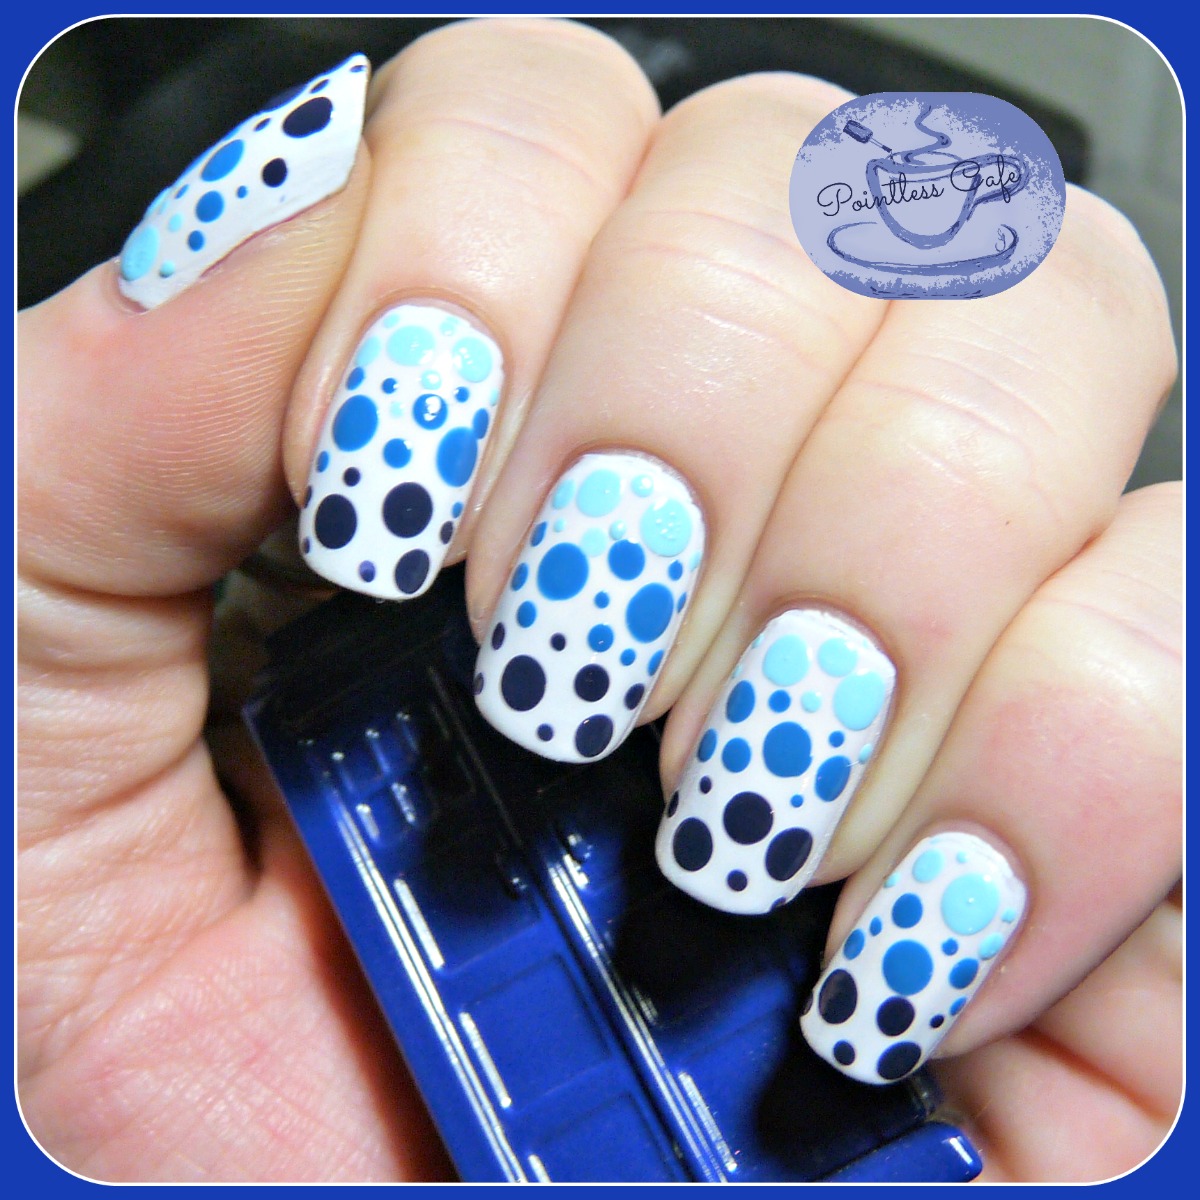 Dotticure Week: Day 2 - Gradient Dots | Pointless Cafe